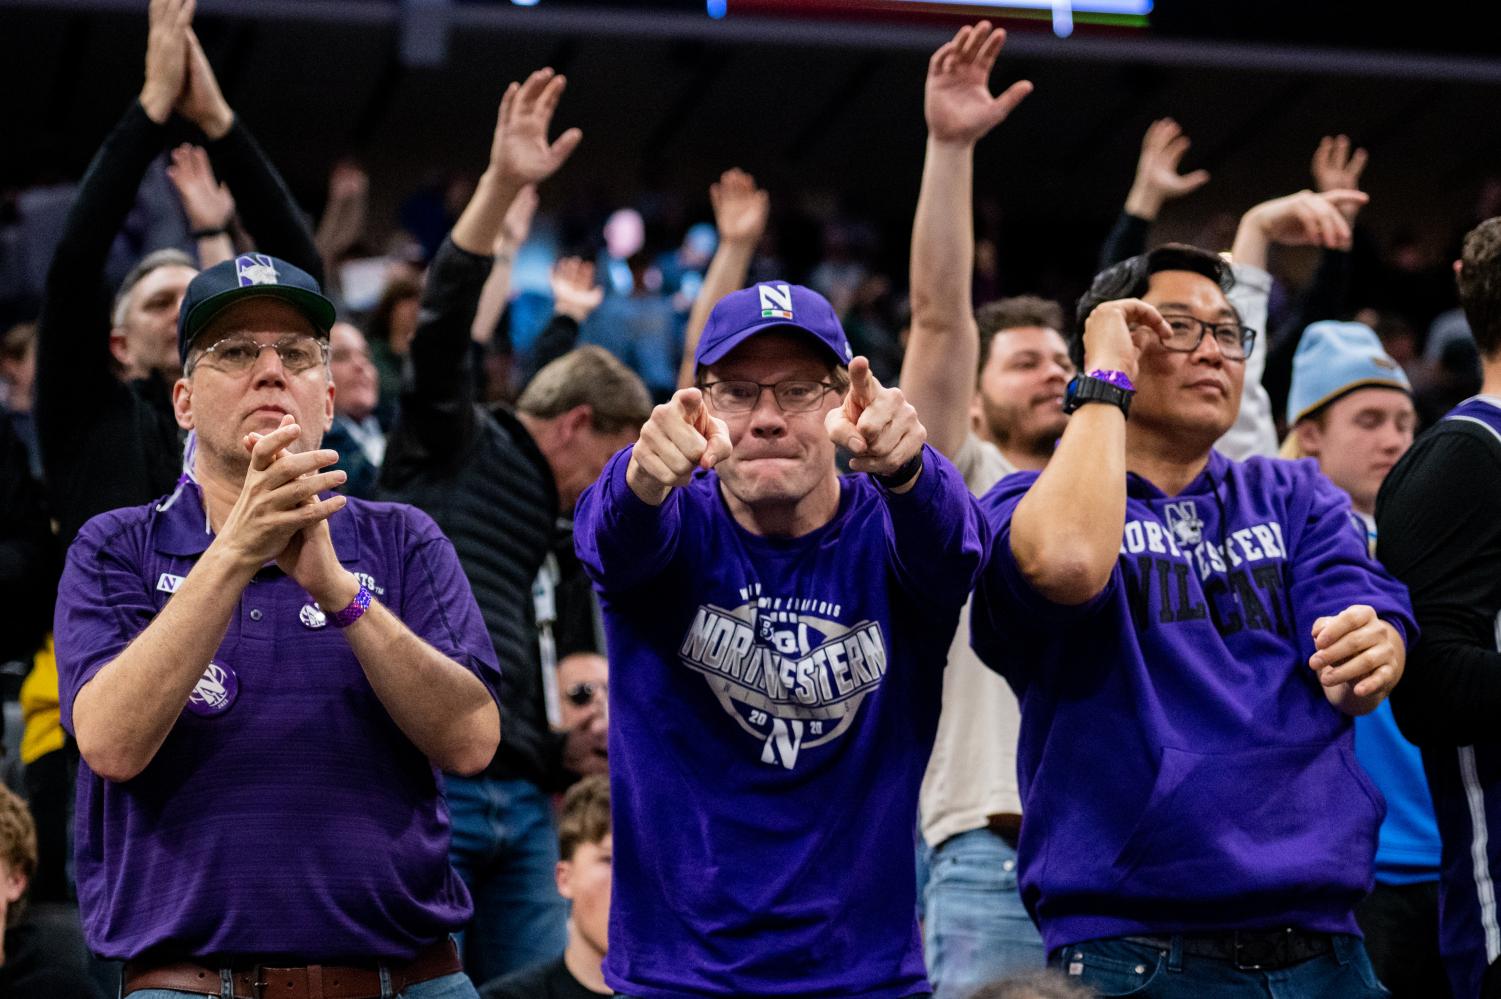 Three fans in purple cheer from the crowd. The one in the middle points to the camera with two fingers.